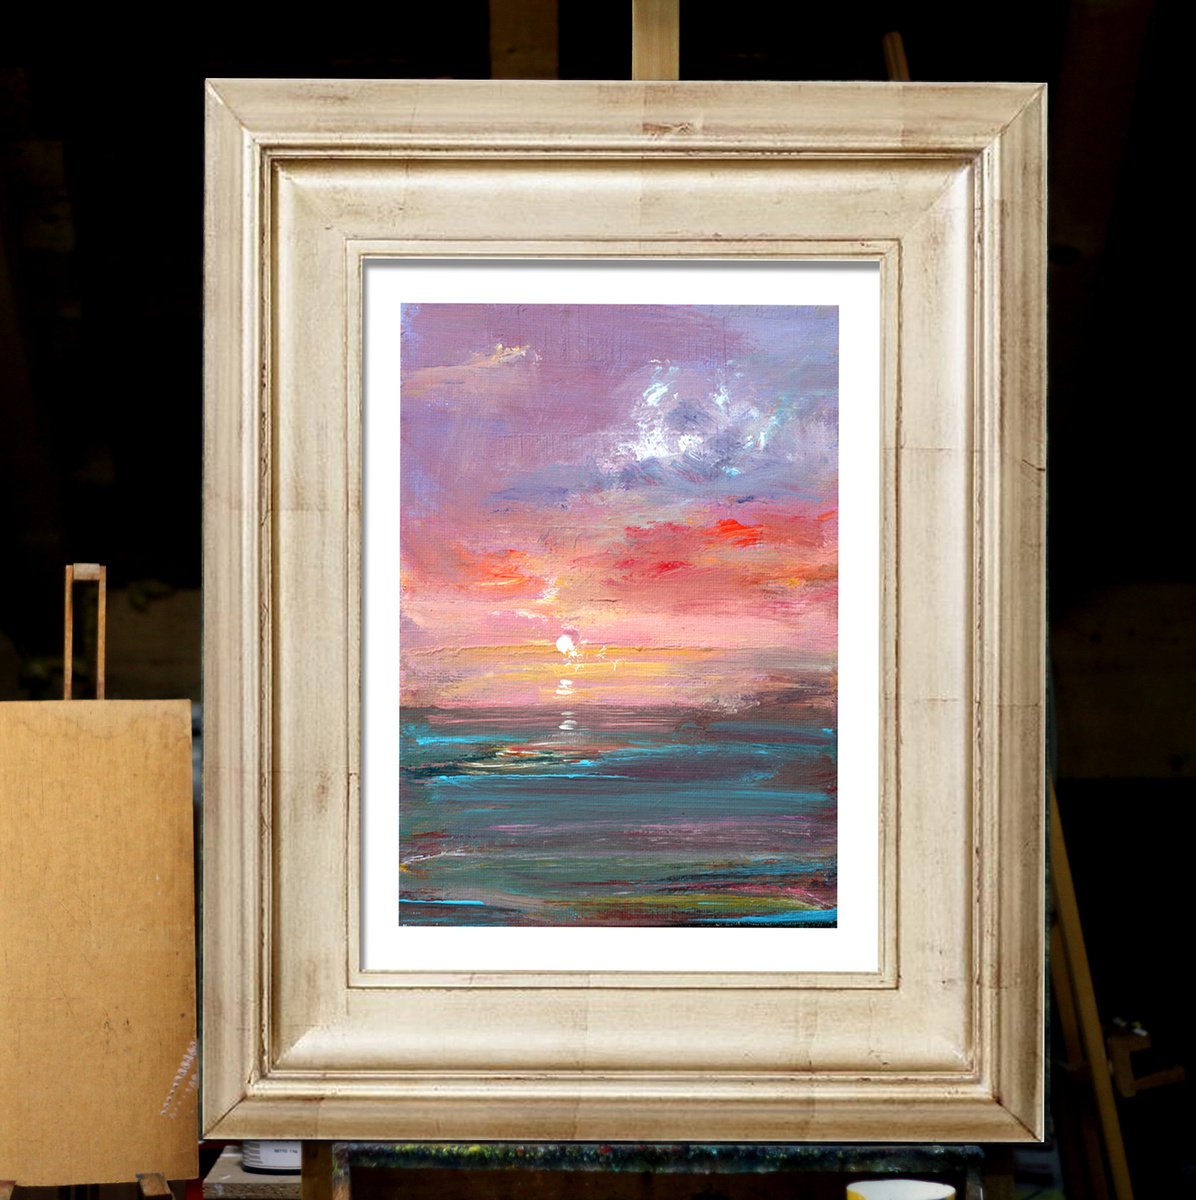 DISCOUNT SPECIAL PRICE GOLDEN TWILIGHT 02 ORIGINAL PAINTING, SUNSET,SEASCAPE by mir-jan